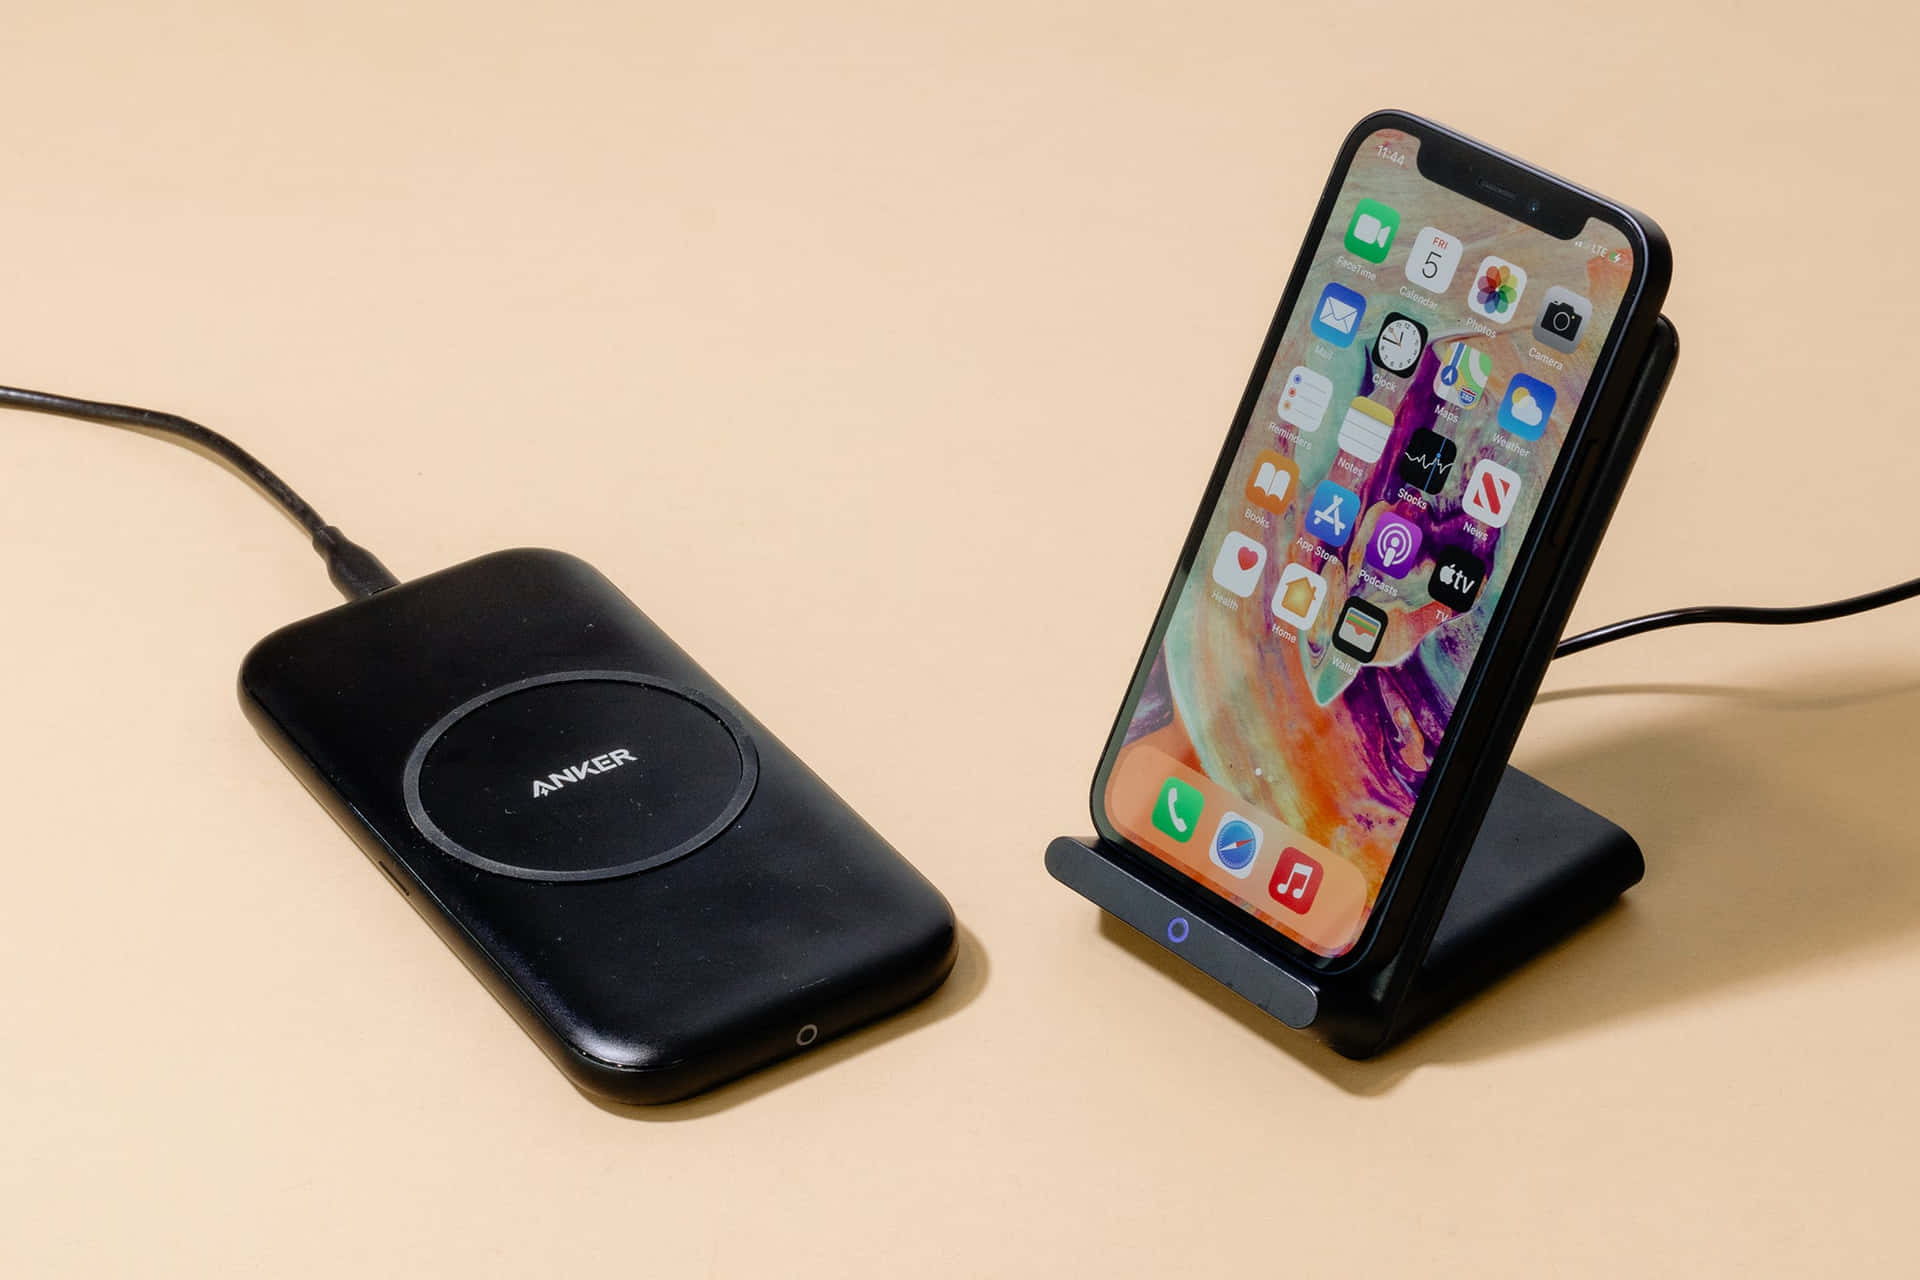 Wireless Charging - Get your Devices Powered Instantly without the Wires" Wallpaper